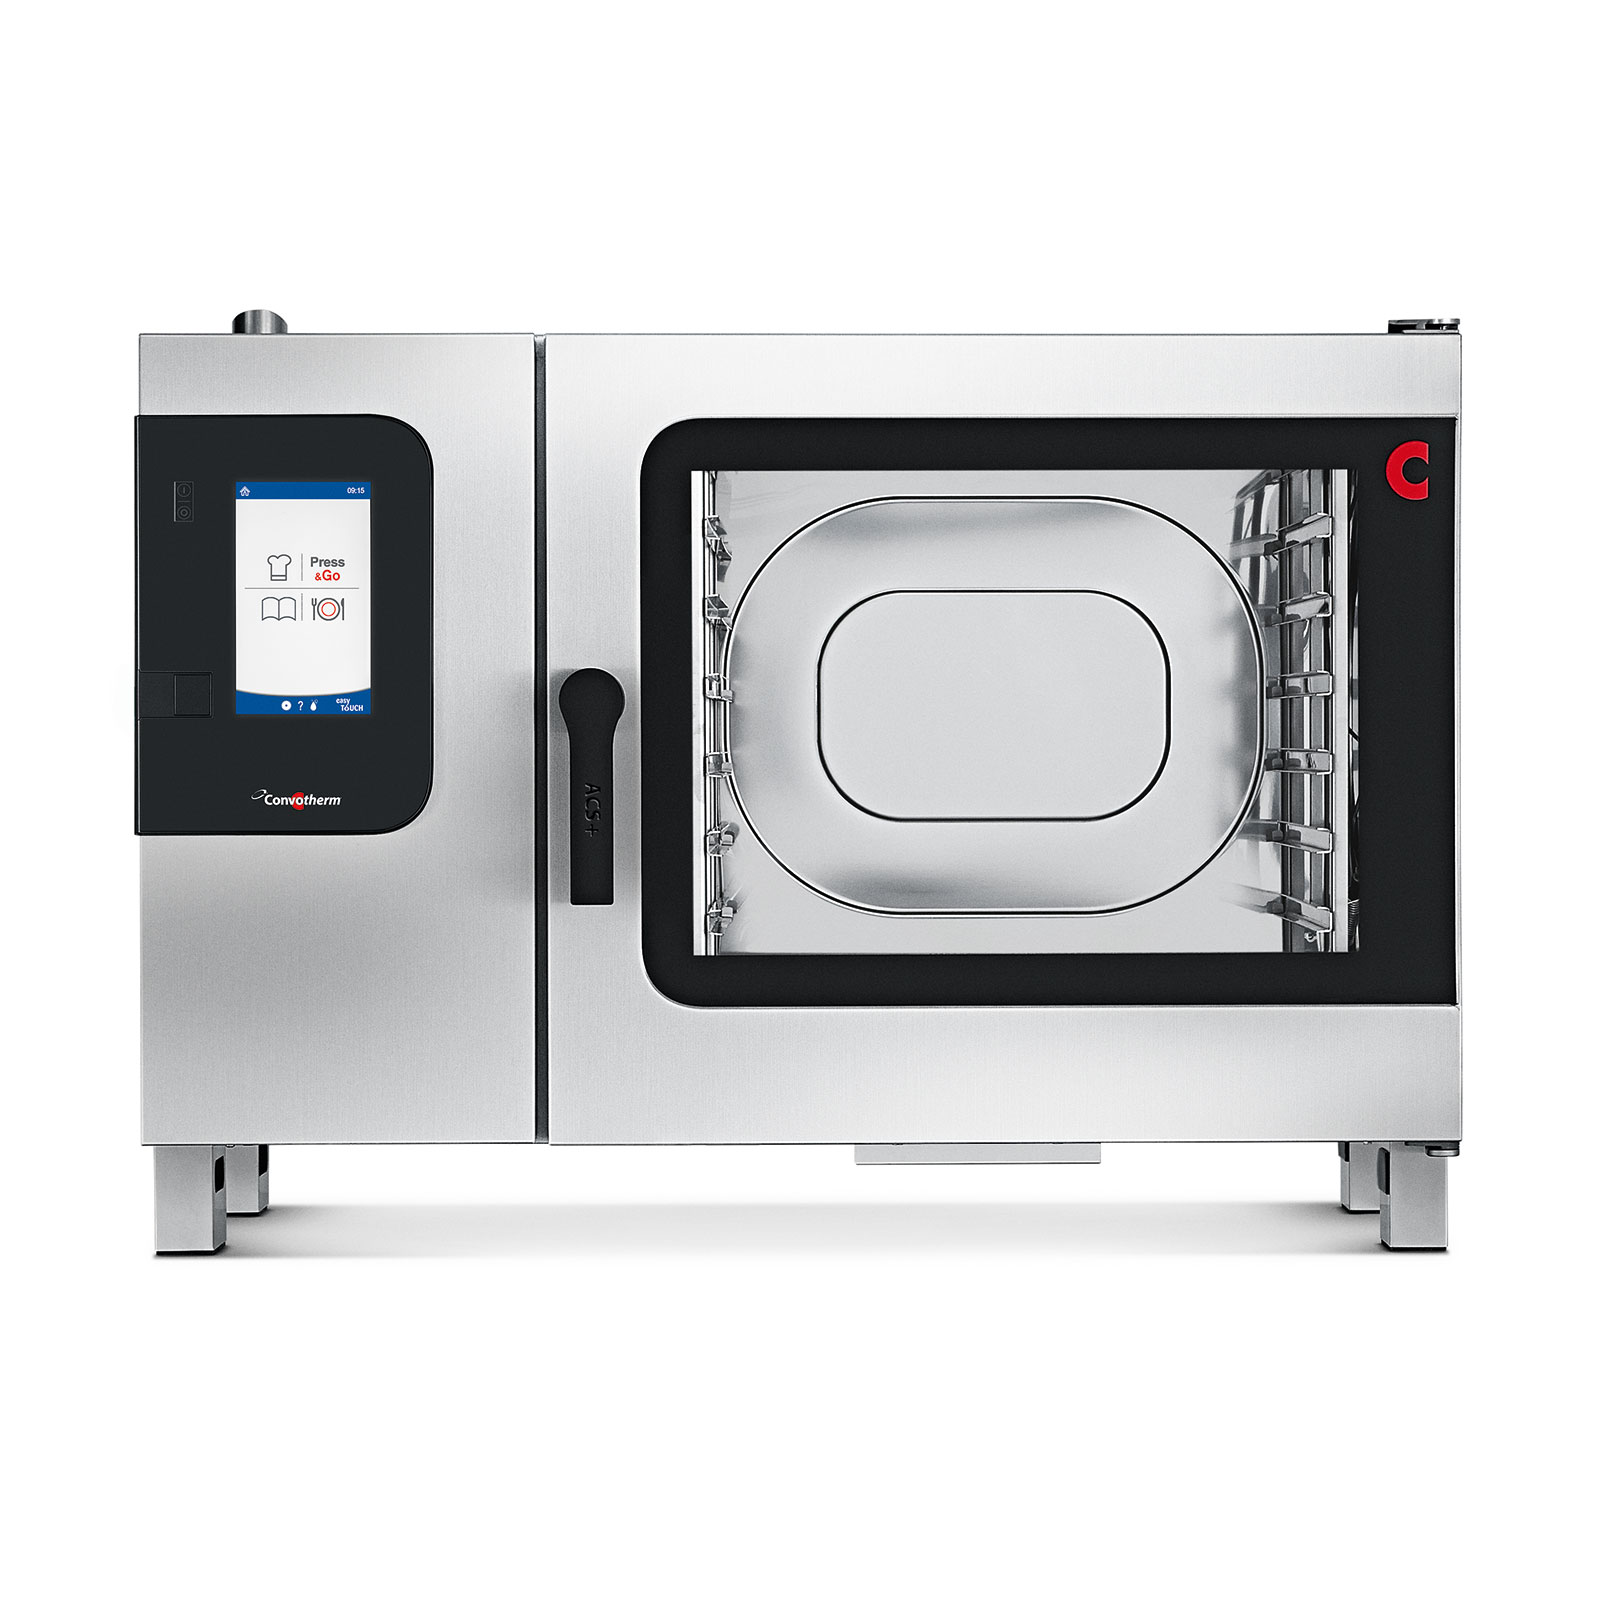 Convotherm C4 ET 6.20GS Full-Size Gas Combi Oven w/ Programmable Controls, Boilerless